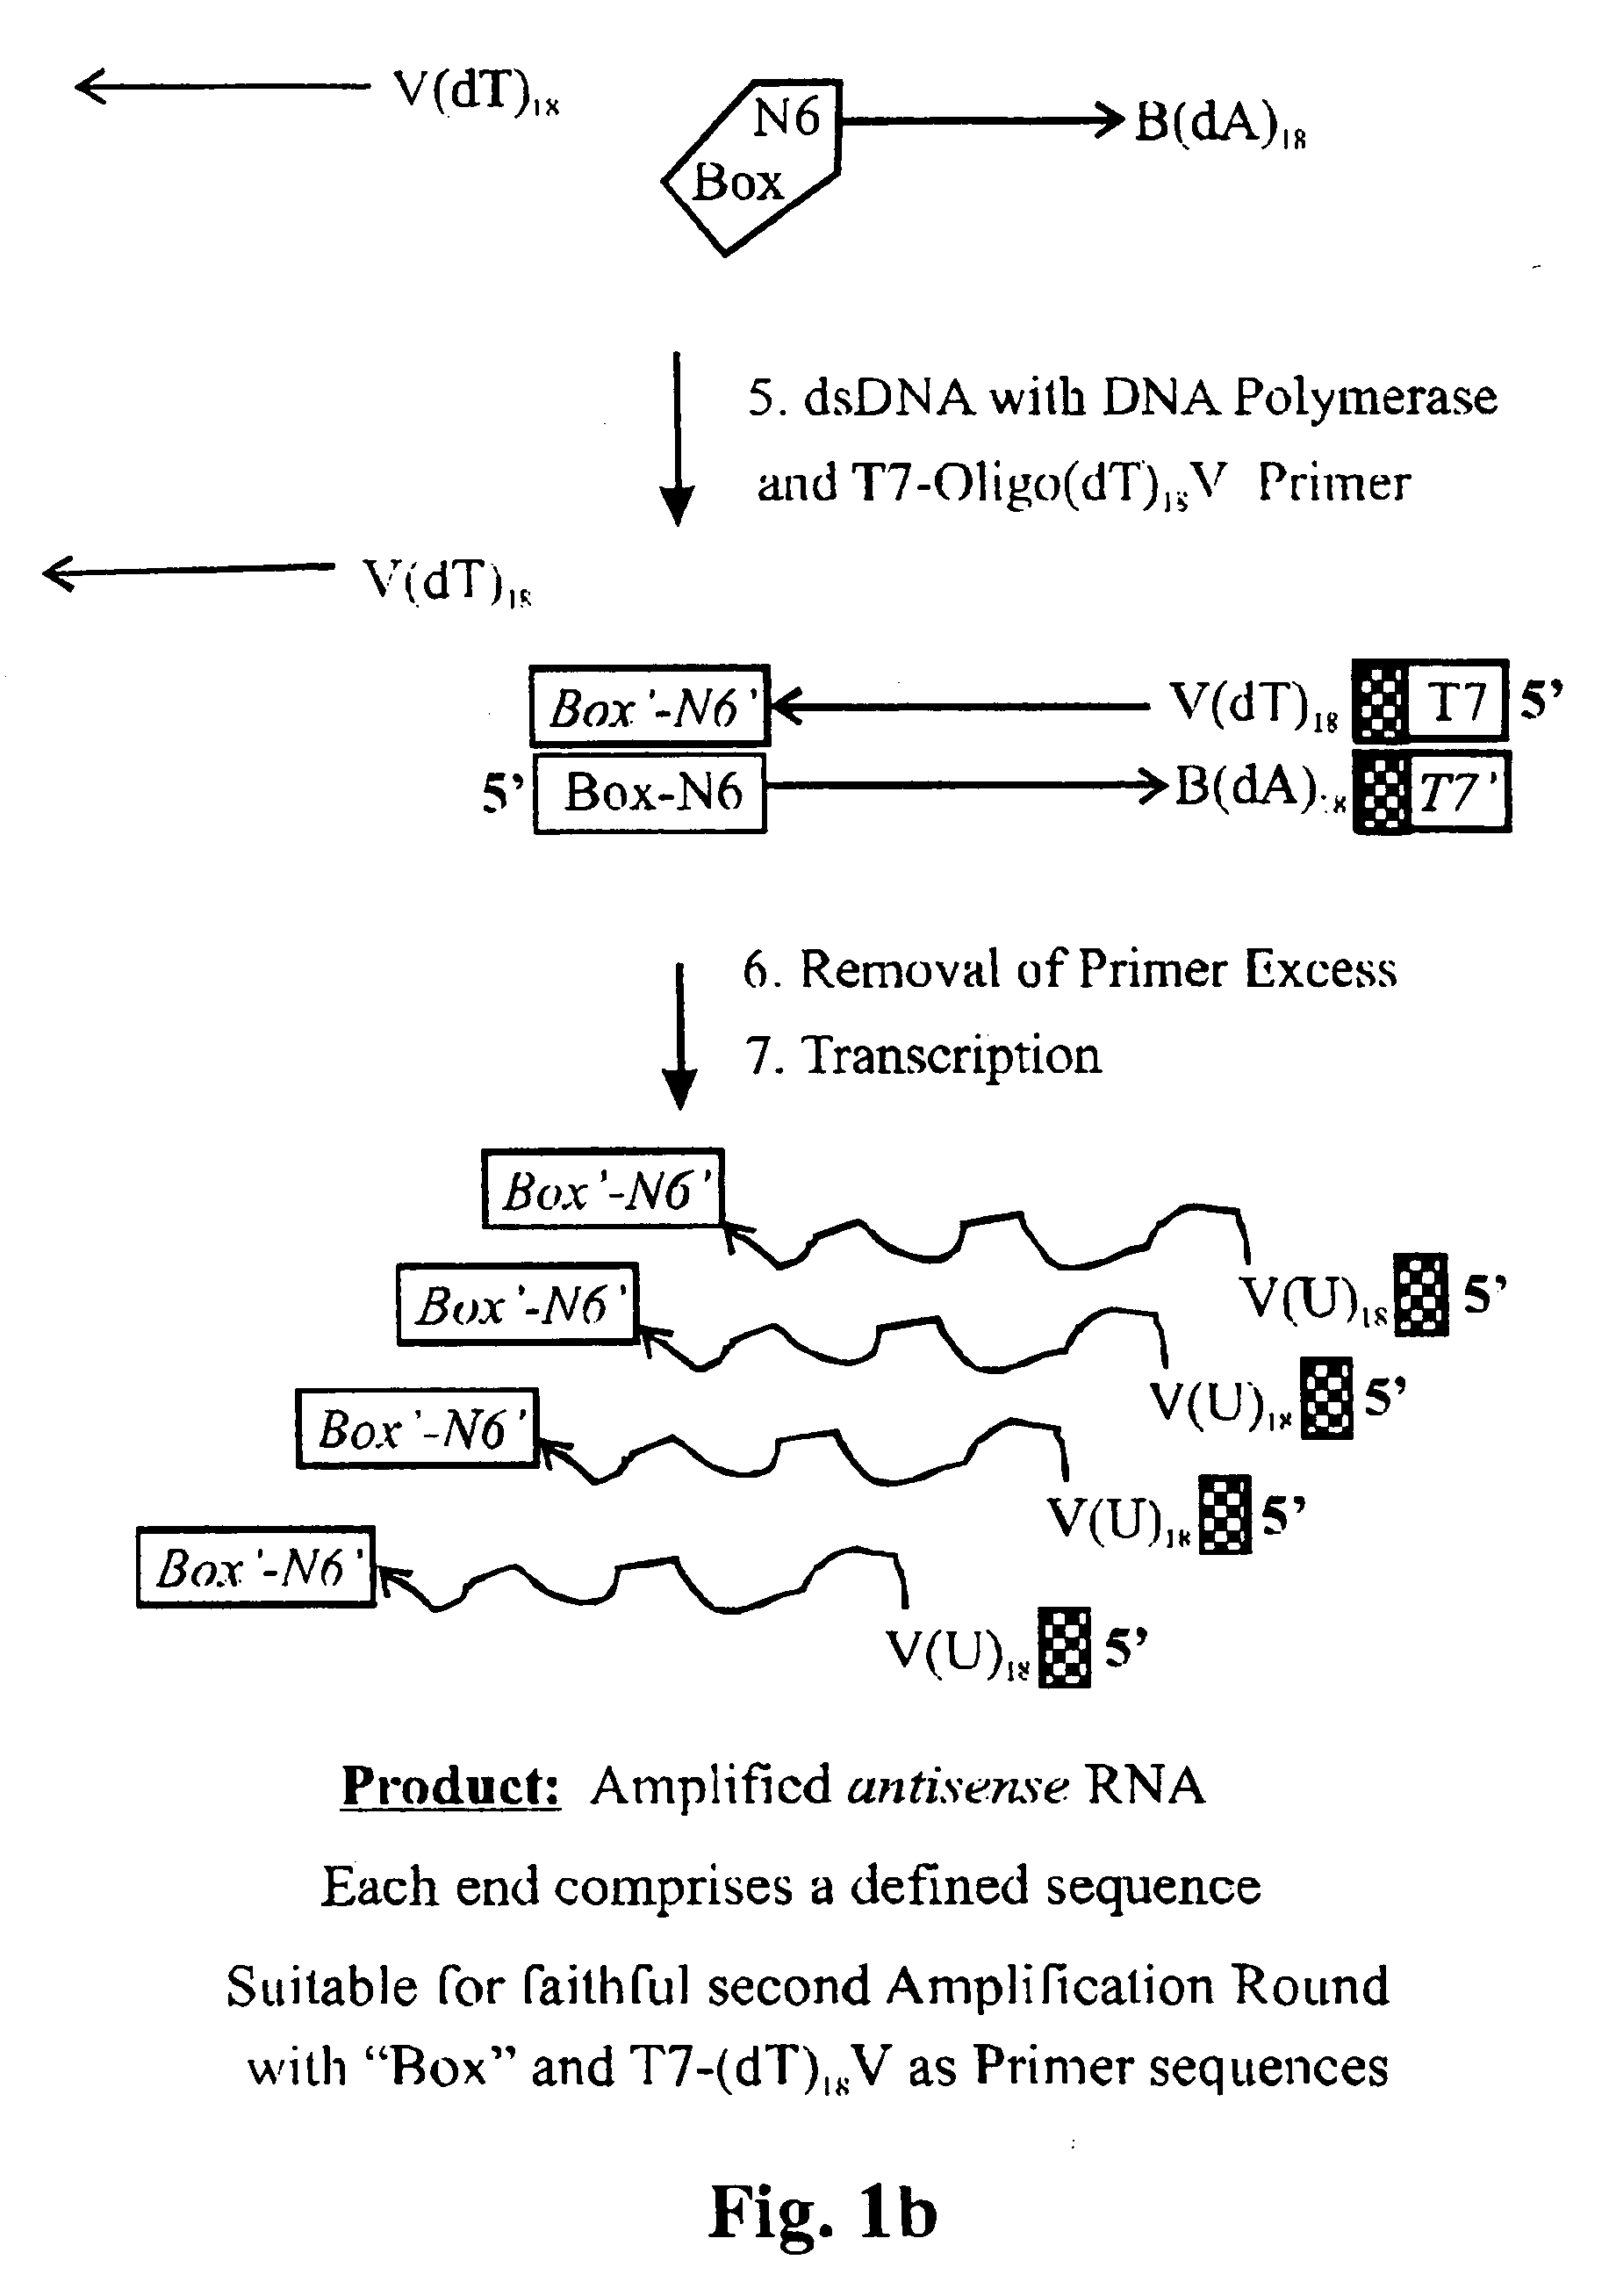 Amplification of ribonucleic acids